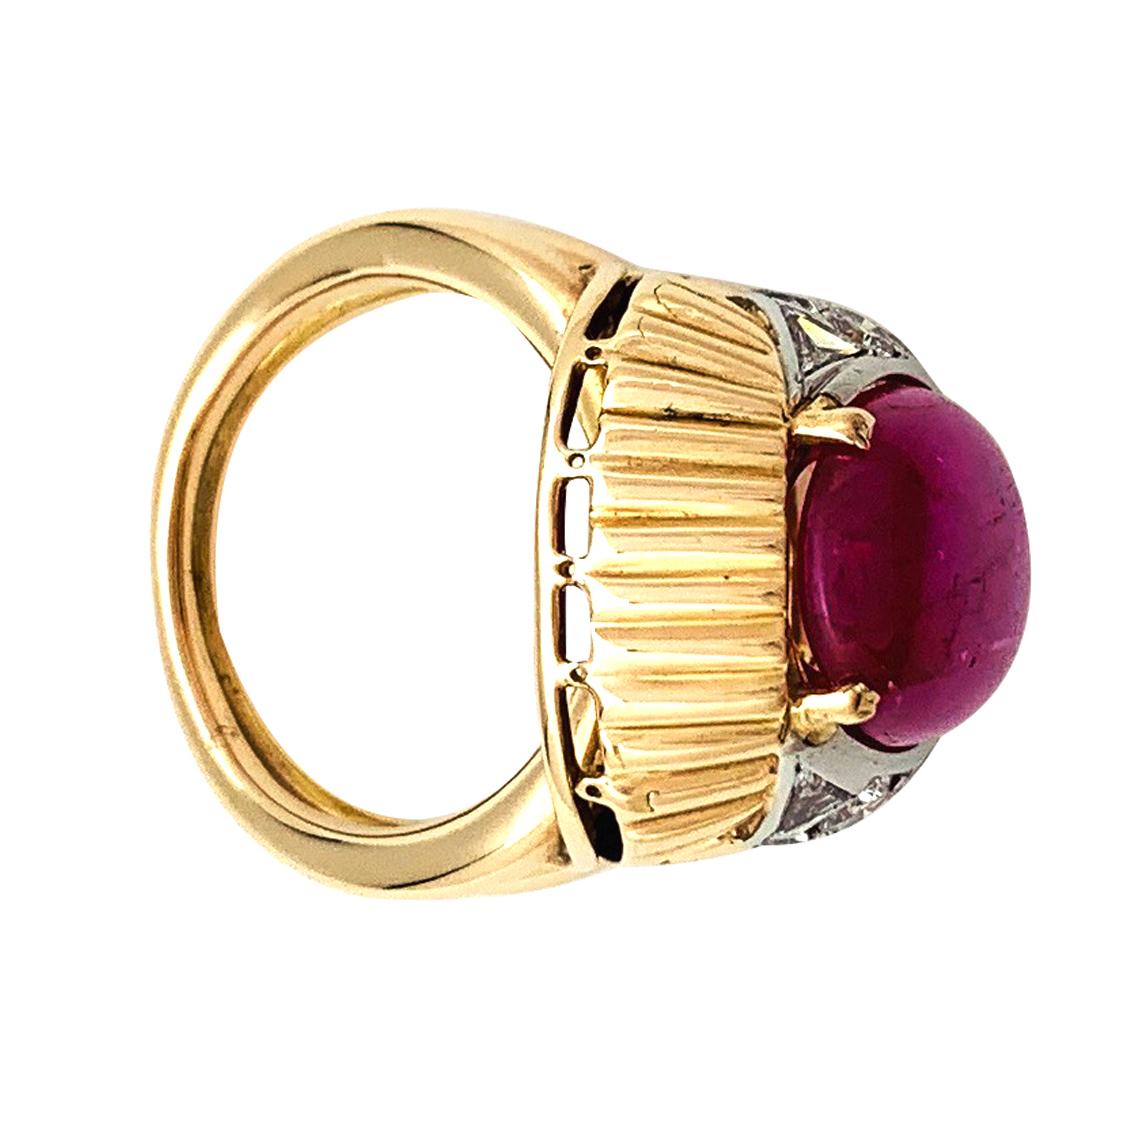 Burmese Ruby Cabochon on a 1950s Cocktail Ring 1